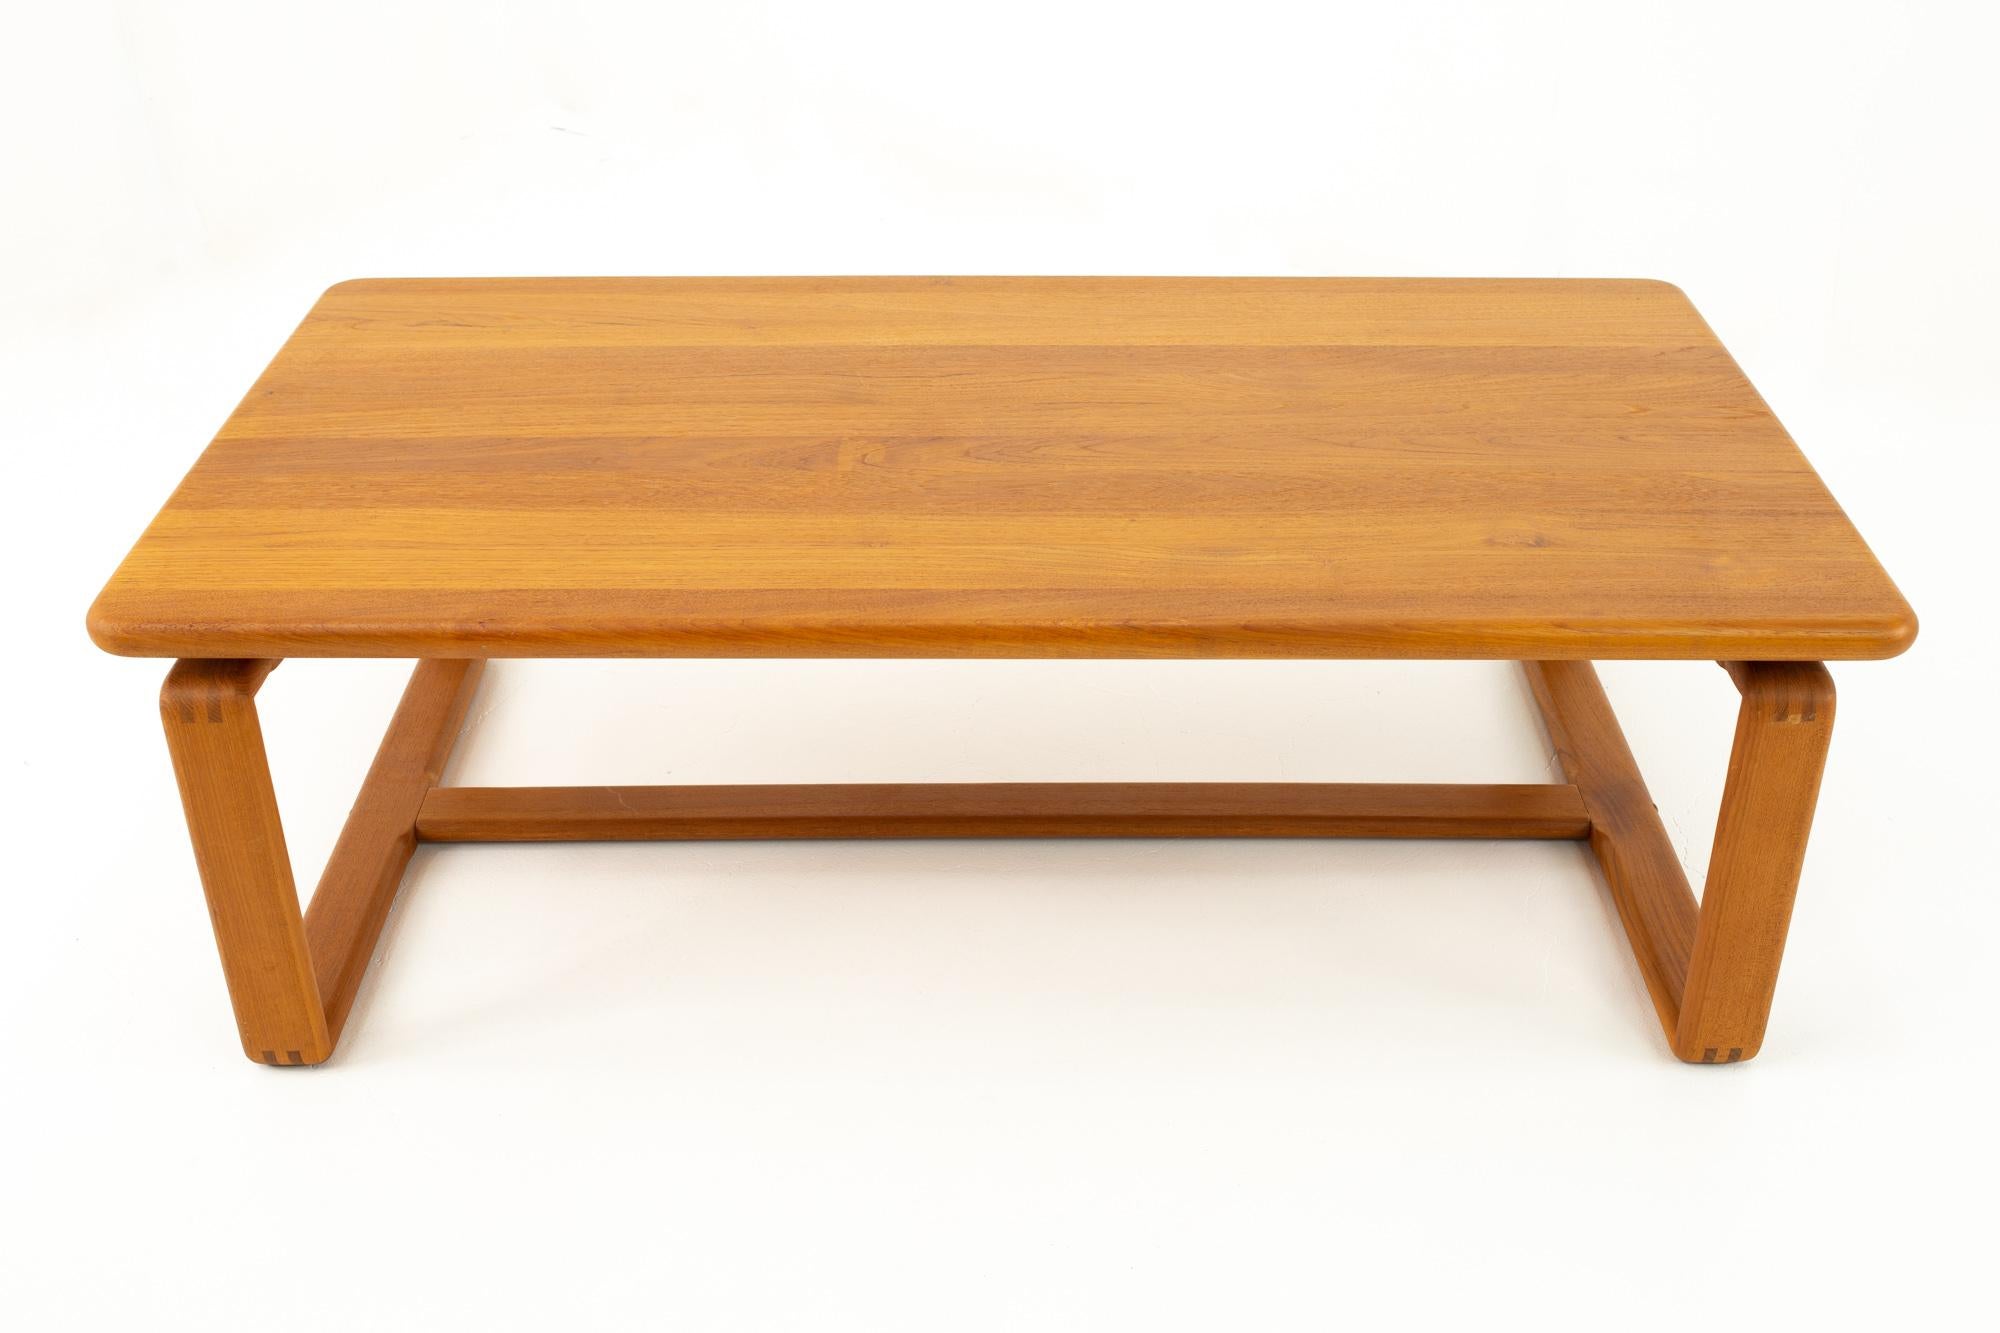 KD furniture Mid Century teak coffee table

Table measures: 51 wide x 27 deep x 16.5 height 

This price includes getting this piece in what we call restored vintage condition. That means the piece is permanently fixed upon purchase so it’s free of